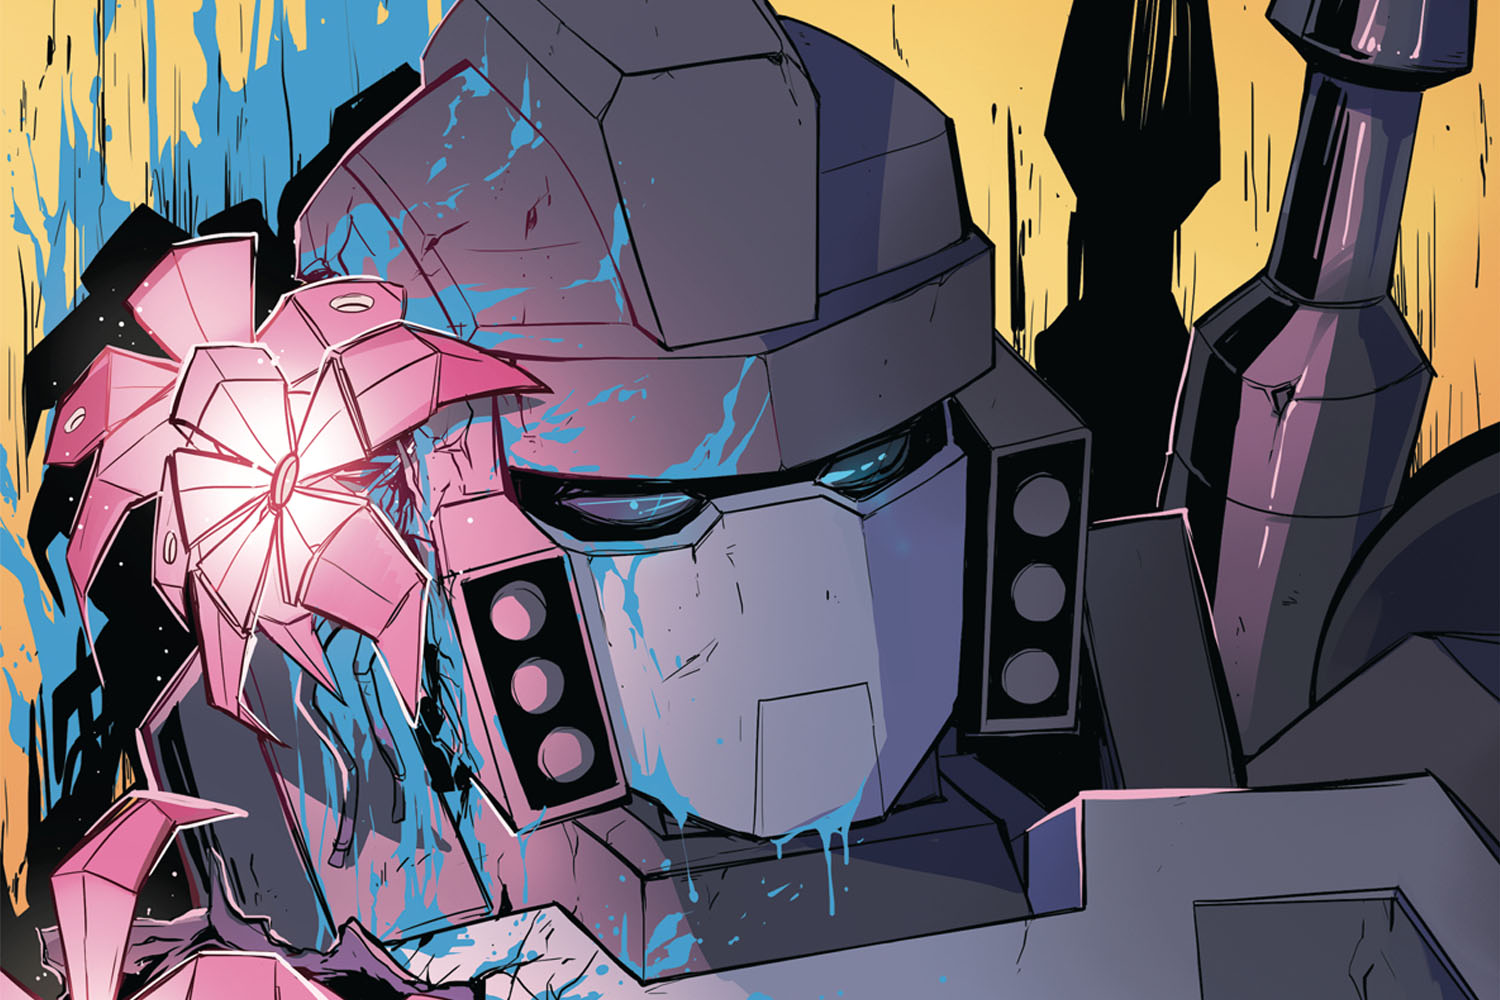 'Transformers' #37 gives necessary exposition